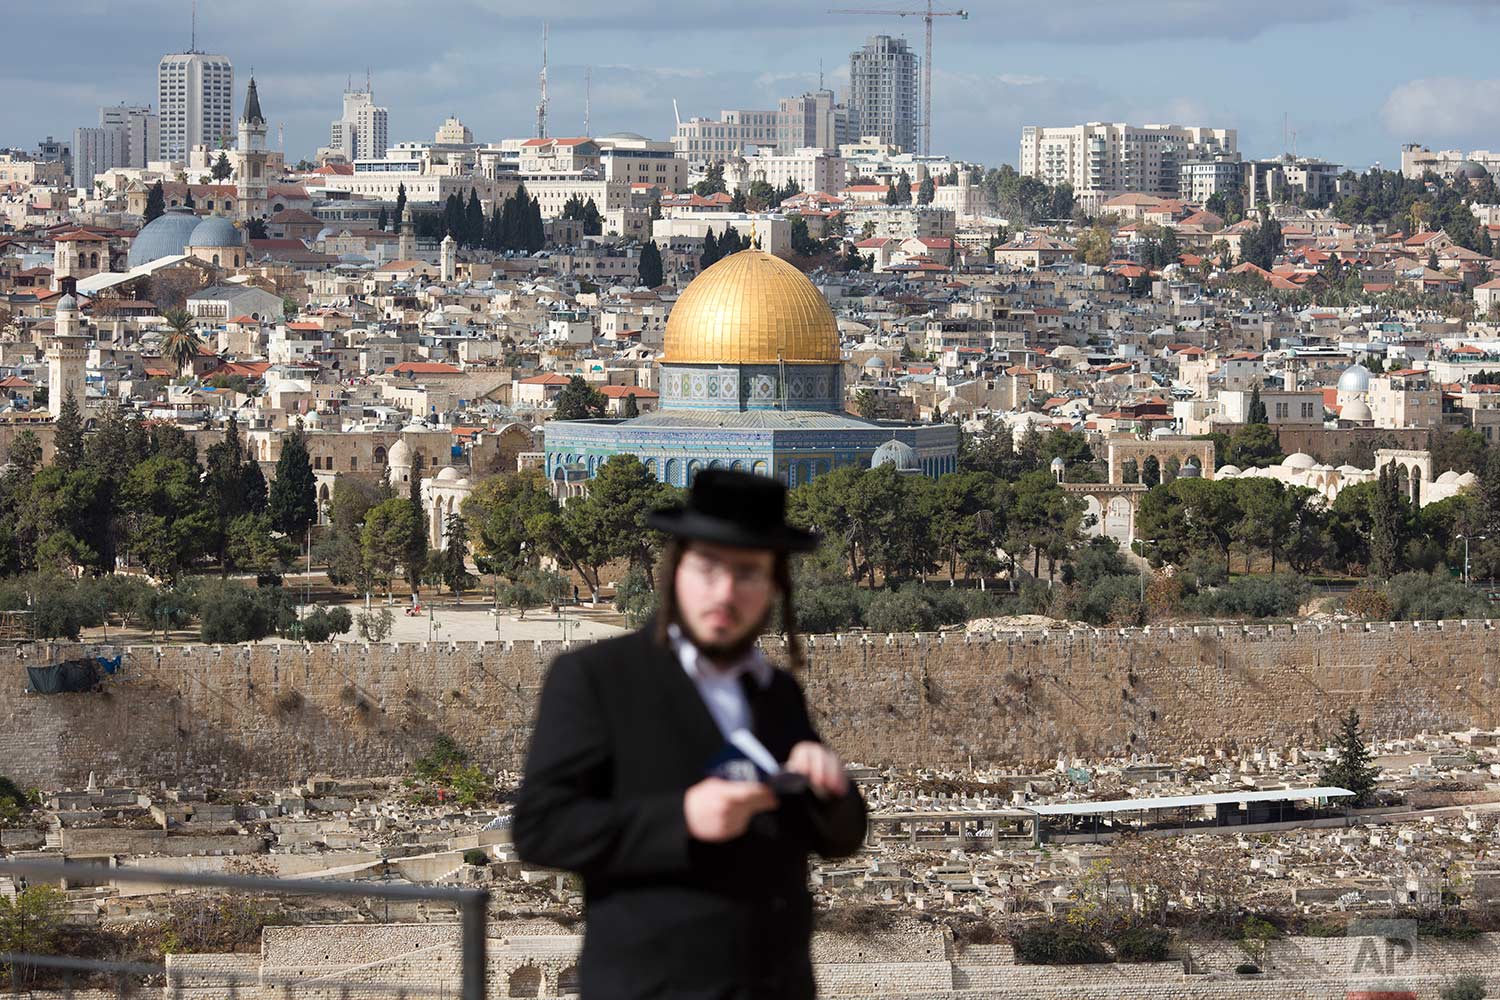  An orthodox Jewish man reads from a holy book in a cemetery near the Dome of the Rock Mosque in the Al Aqsa Mosque compound in Jerusalem's Old City, Thursday, Dec. 7, 2017. A day earlier, U.S. President Donald Trump announced his decision to recognize Jerusalem as Israel's capital. (AP Photo/Ariel Schalit) 